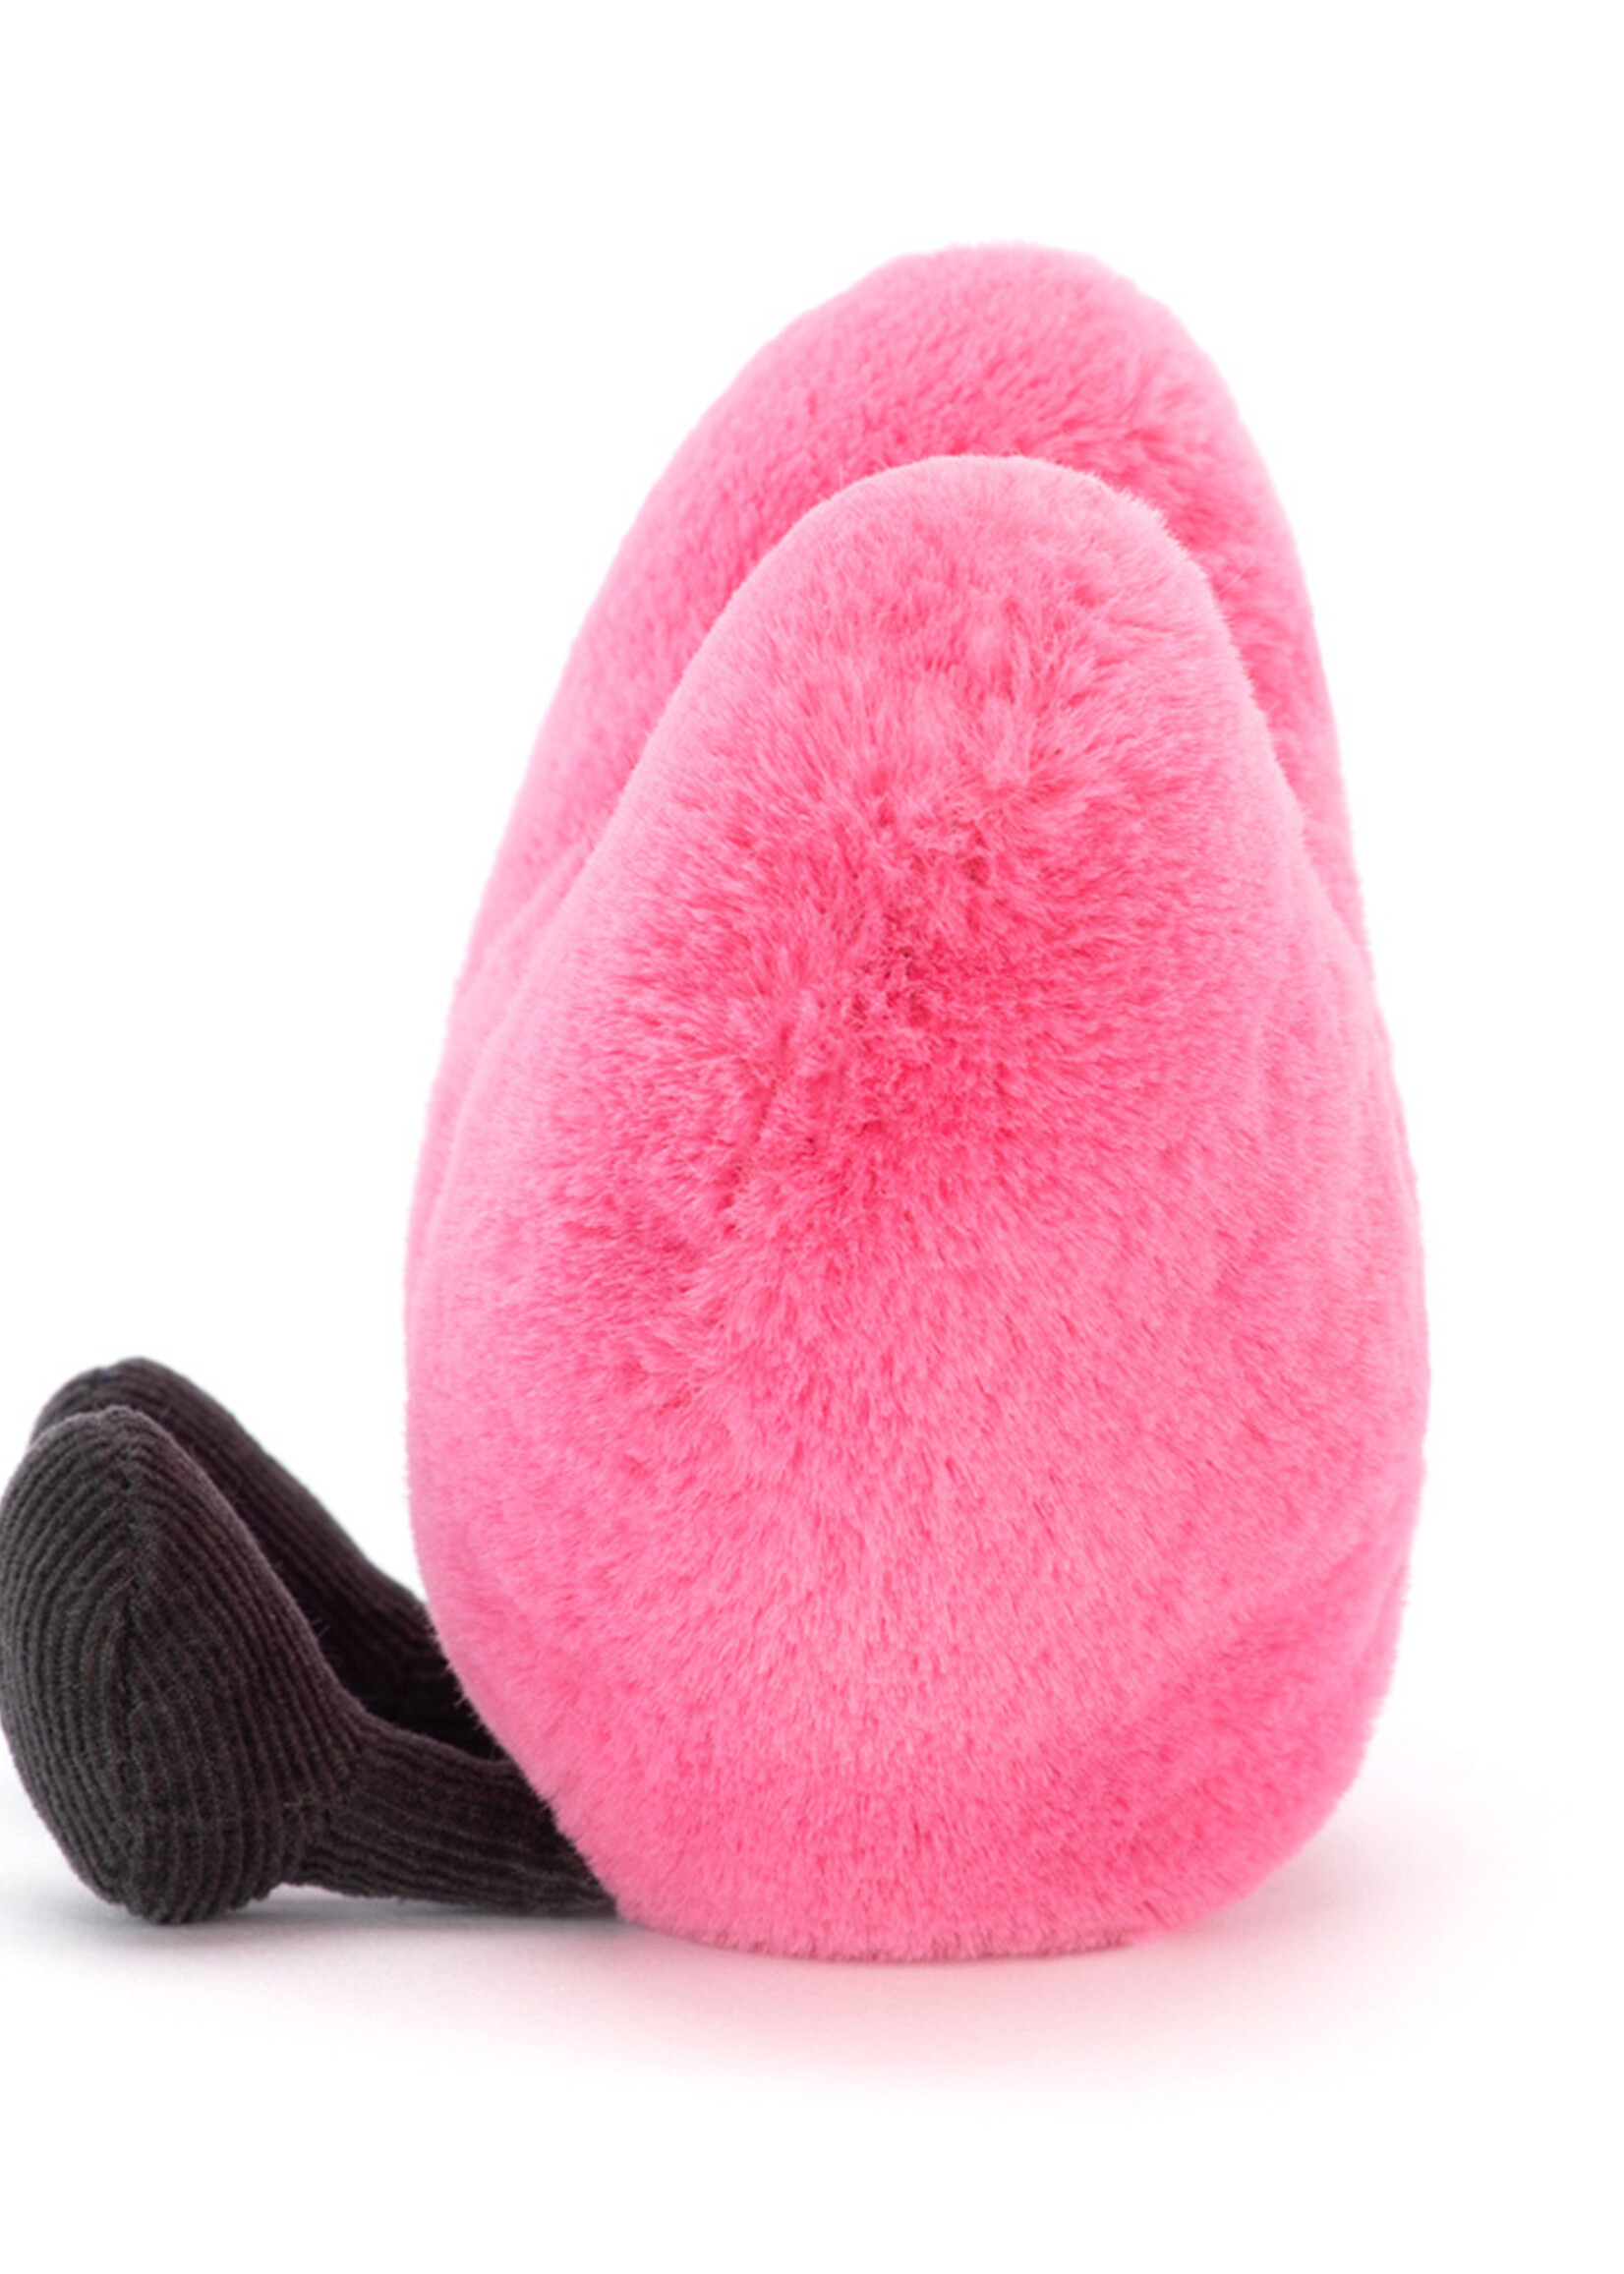 Jellycat Jellycat | Amuseable Hot Pink Heart - Small